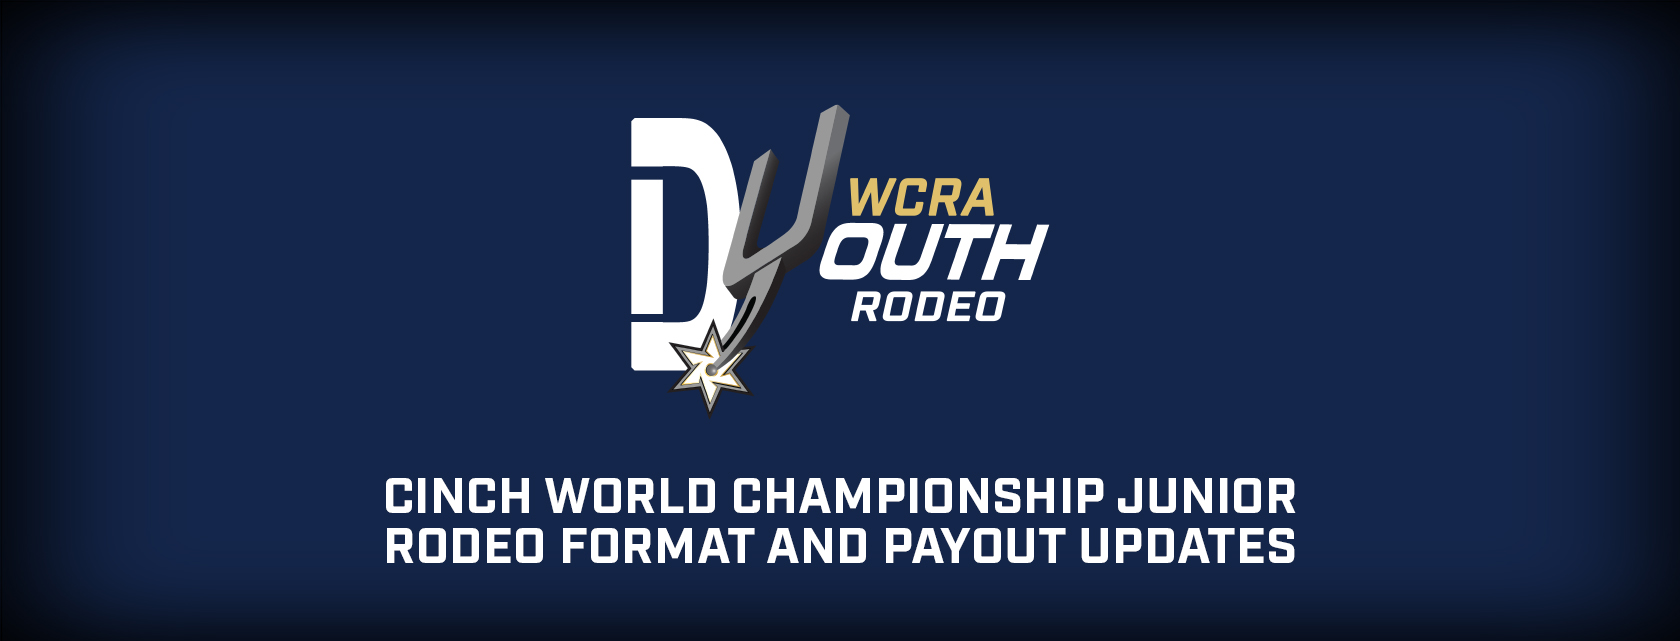 WCRA AND LAZY E ARENA ANNOUNCE FORMAT AND PAYOUT UPDATES FOR 2023 CINCH WORLD CHAMPIONSHIP JUNIOR RODEO